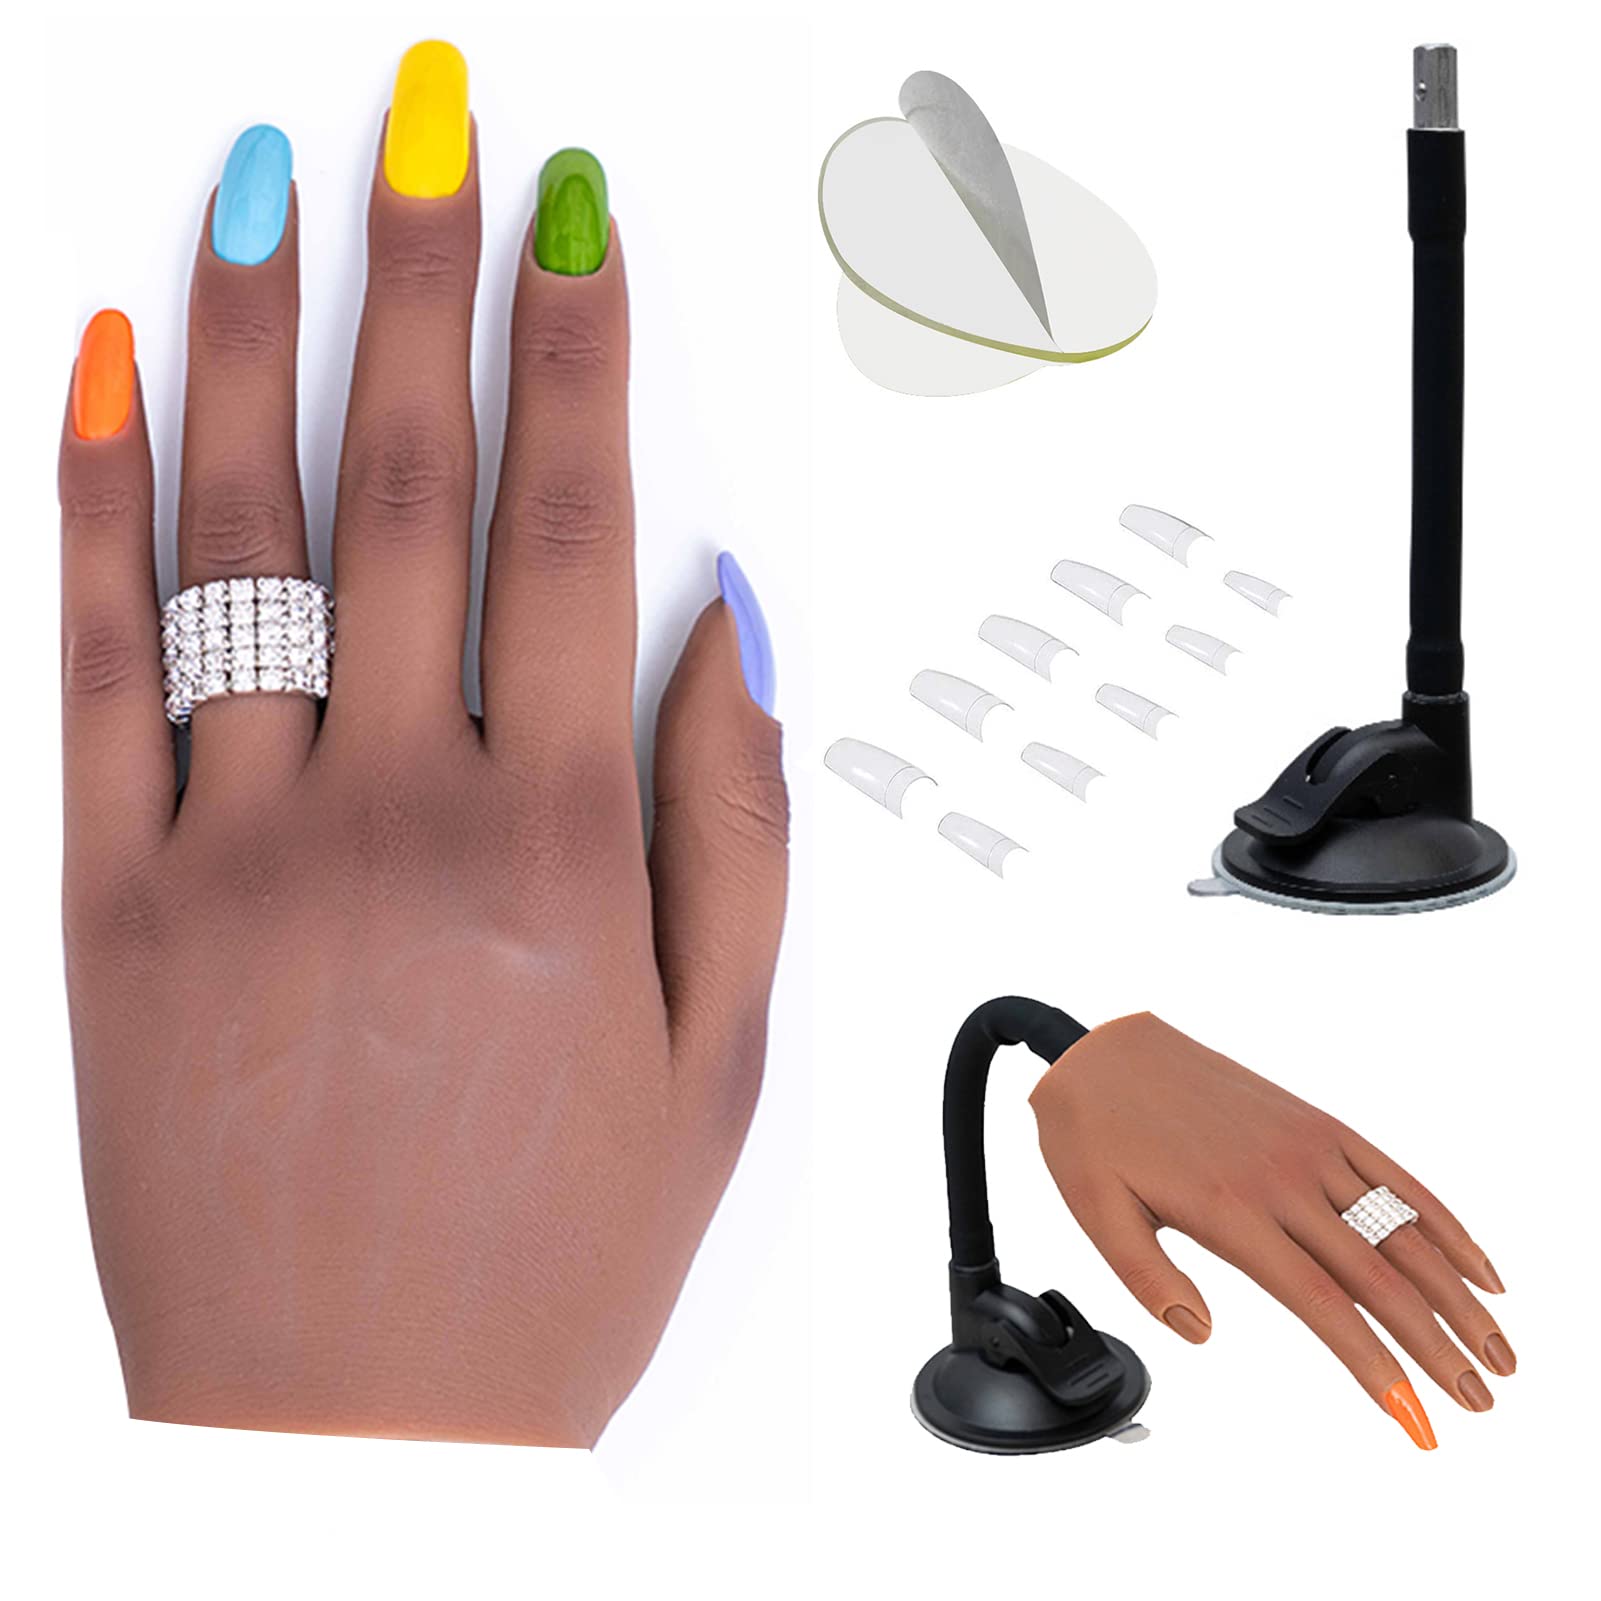 Silicone Nail Practice Hand for Acrylic Nails, Professional